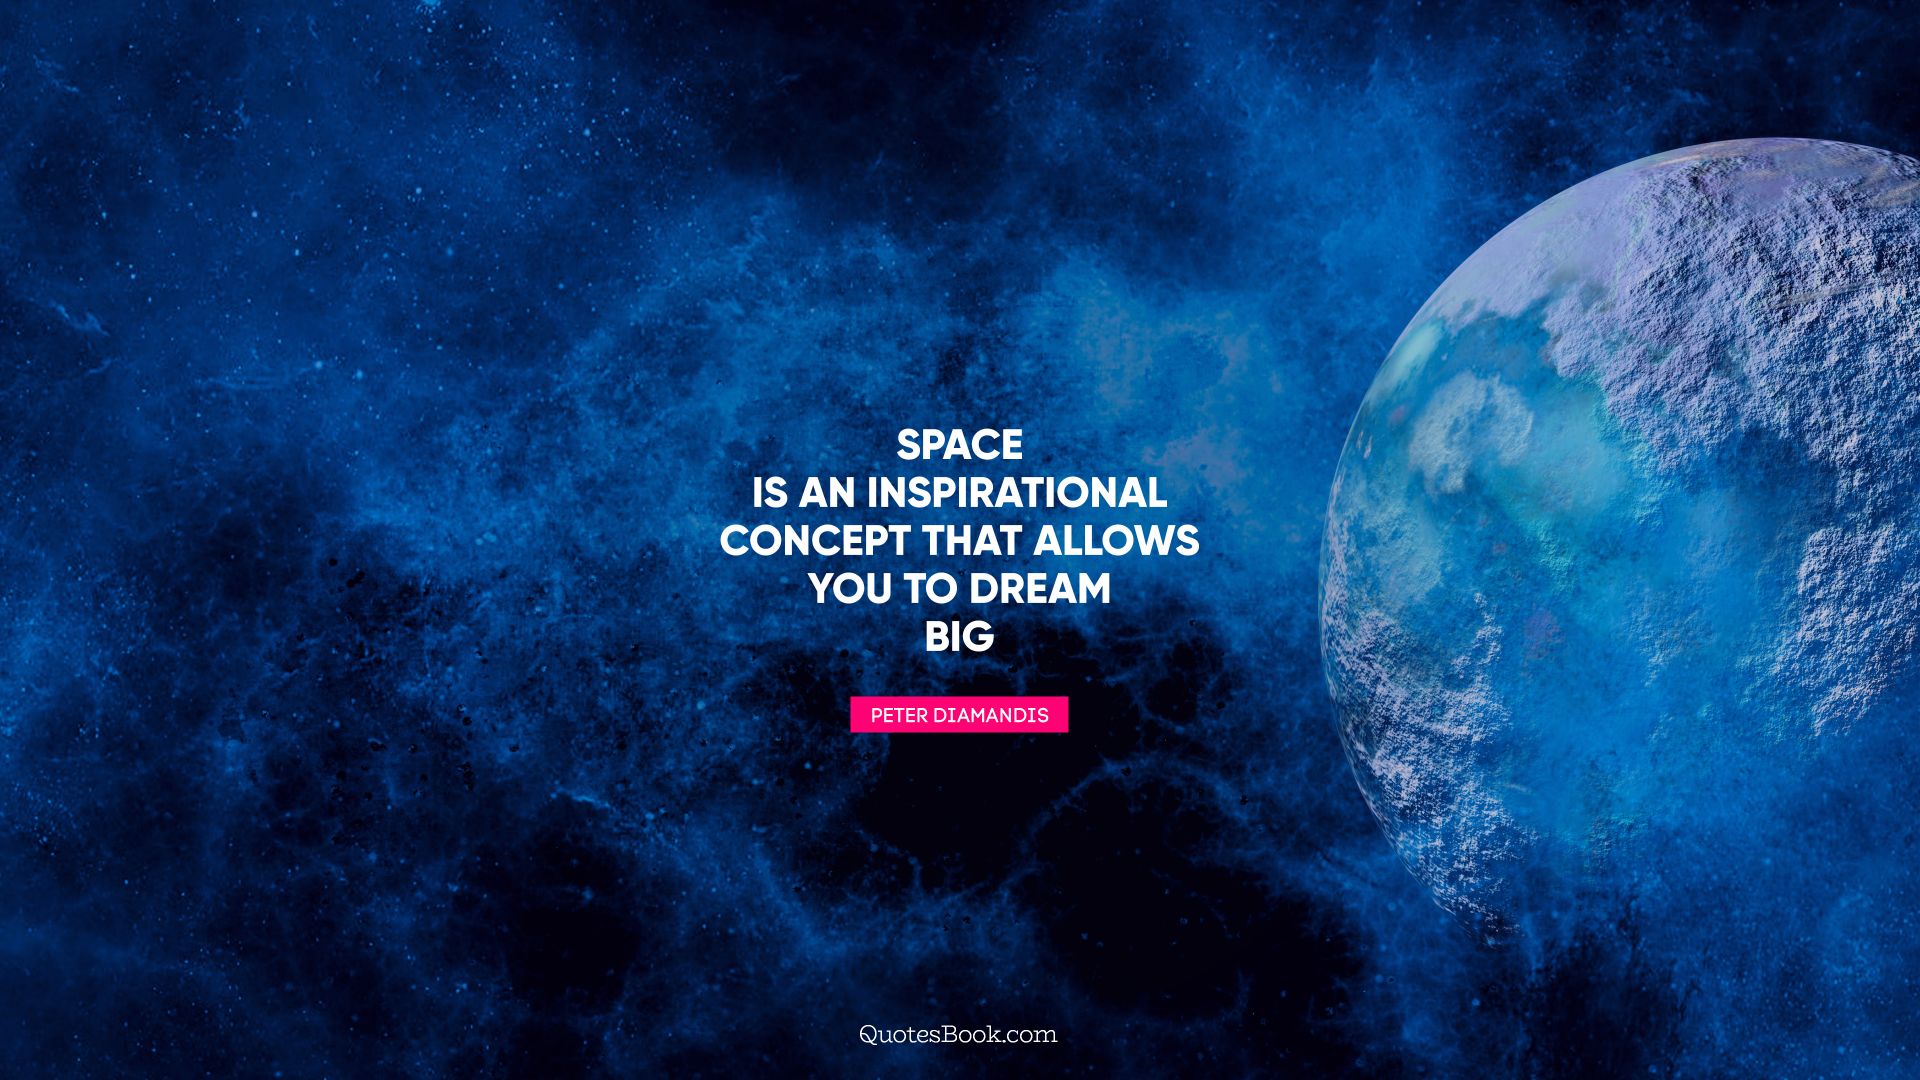 Space is an inspirational concept that allows you to dream big. - Quote by Peter Diamandis